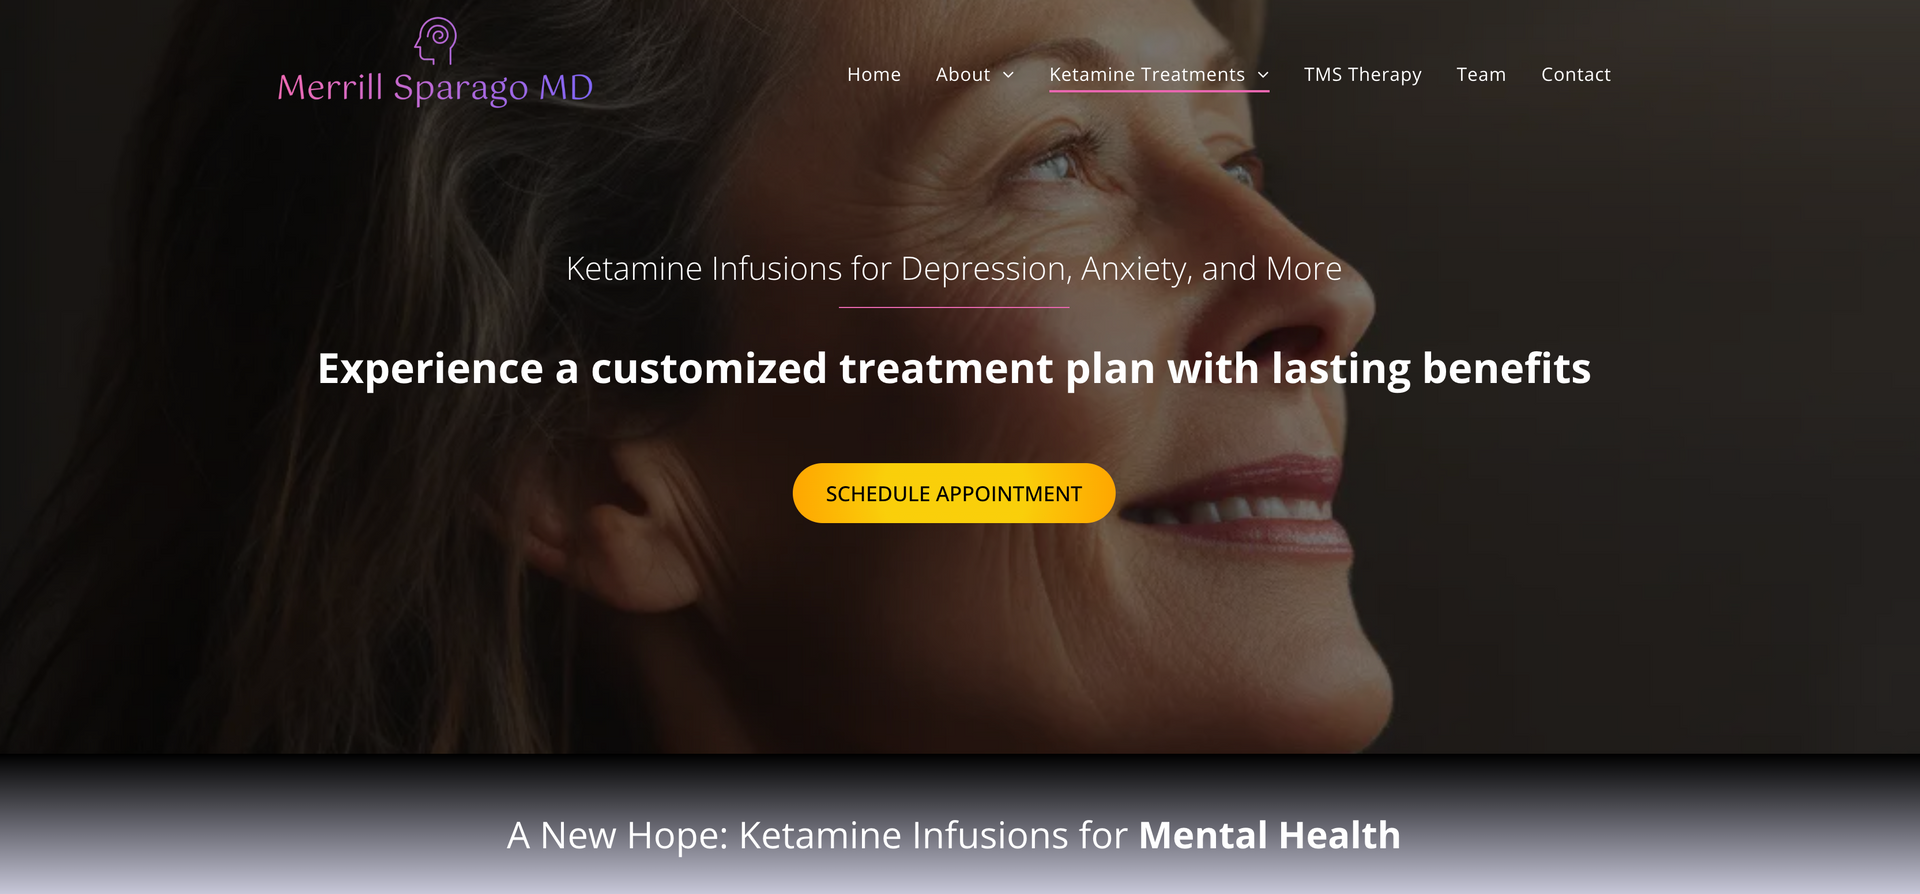 A woman is smiling on the homepage of a website.